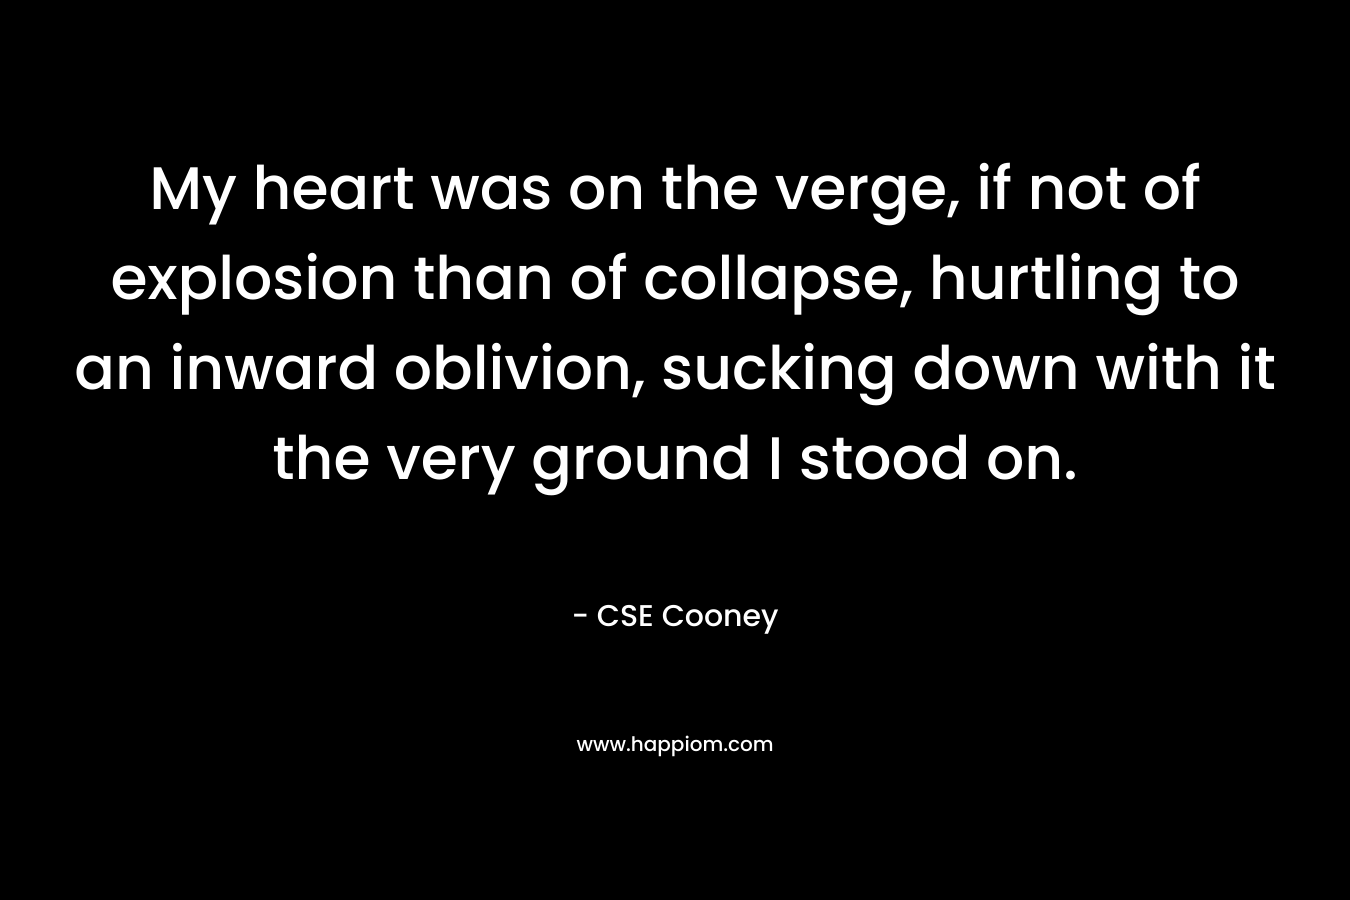 My heart was on the verge, if not of explosion than of collapse, hurtling to an inward oblivion, sucking down with it the very ground I stood on. – CSE Cooney